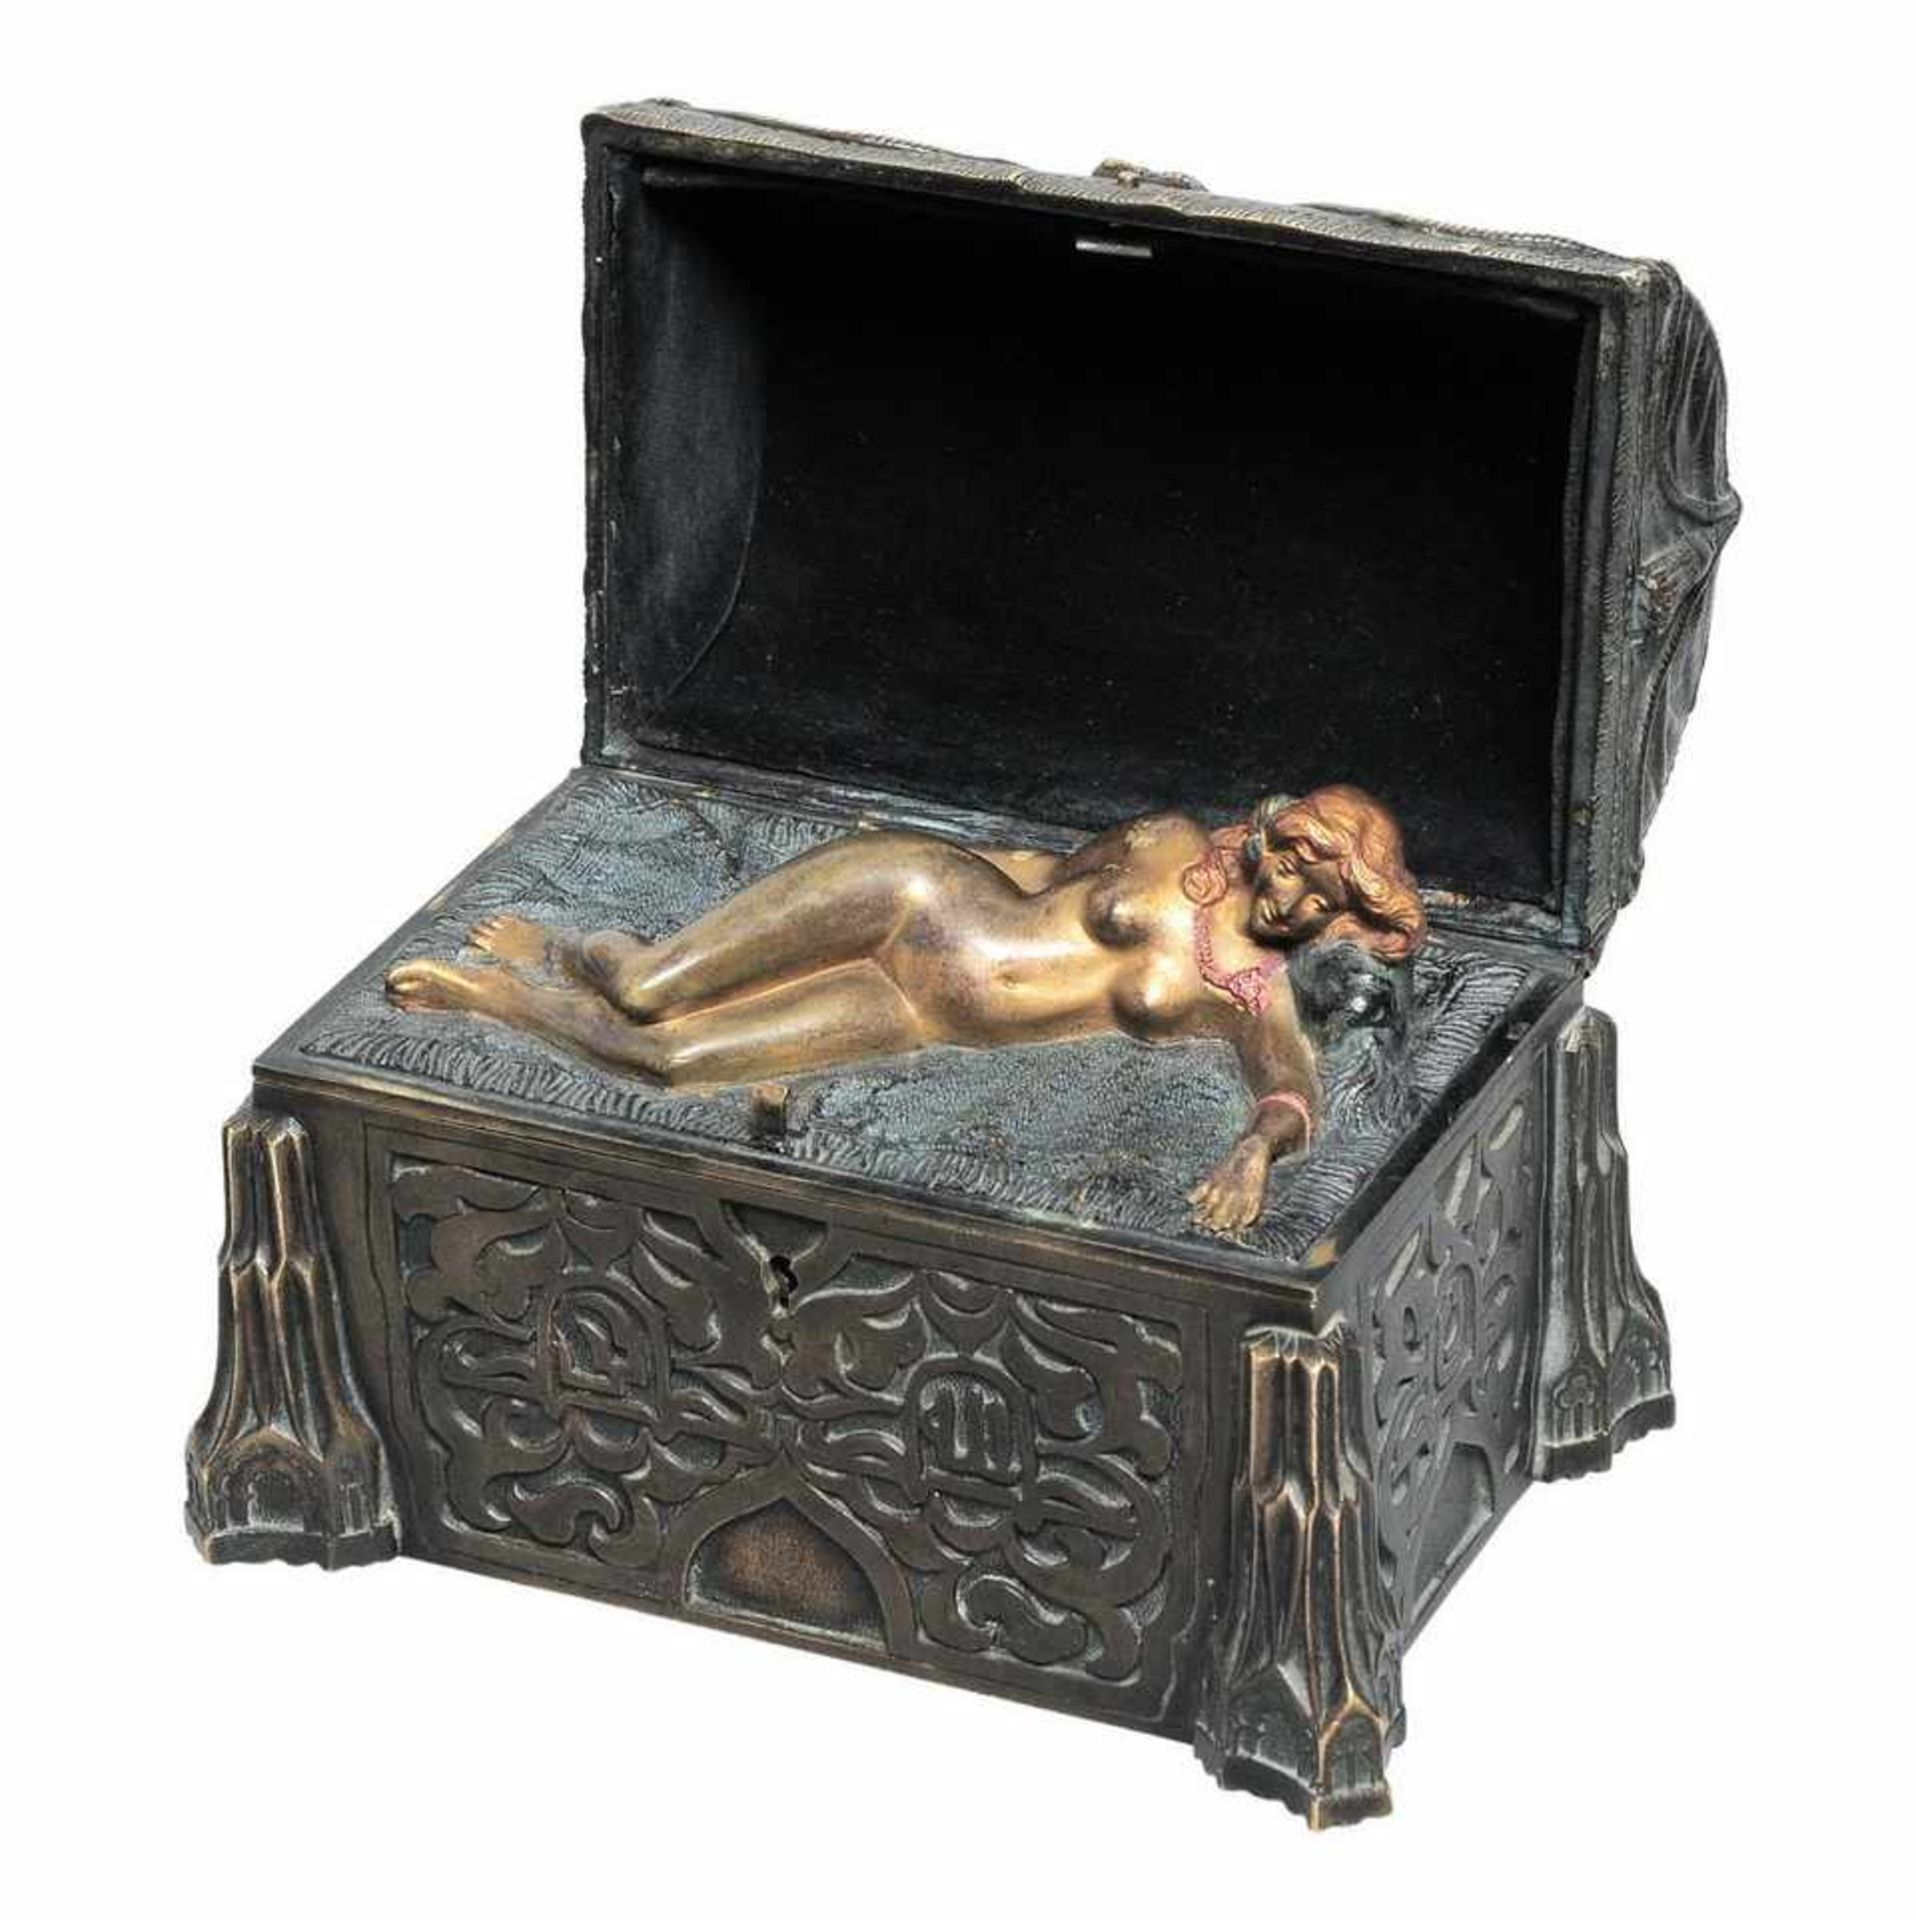 Bronze sculpture with a trick &quot;Chest with naked woman inside&quot;. Vienna.